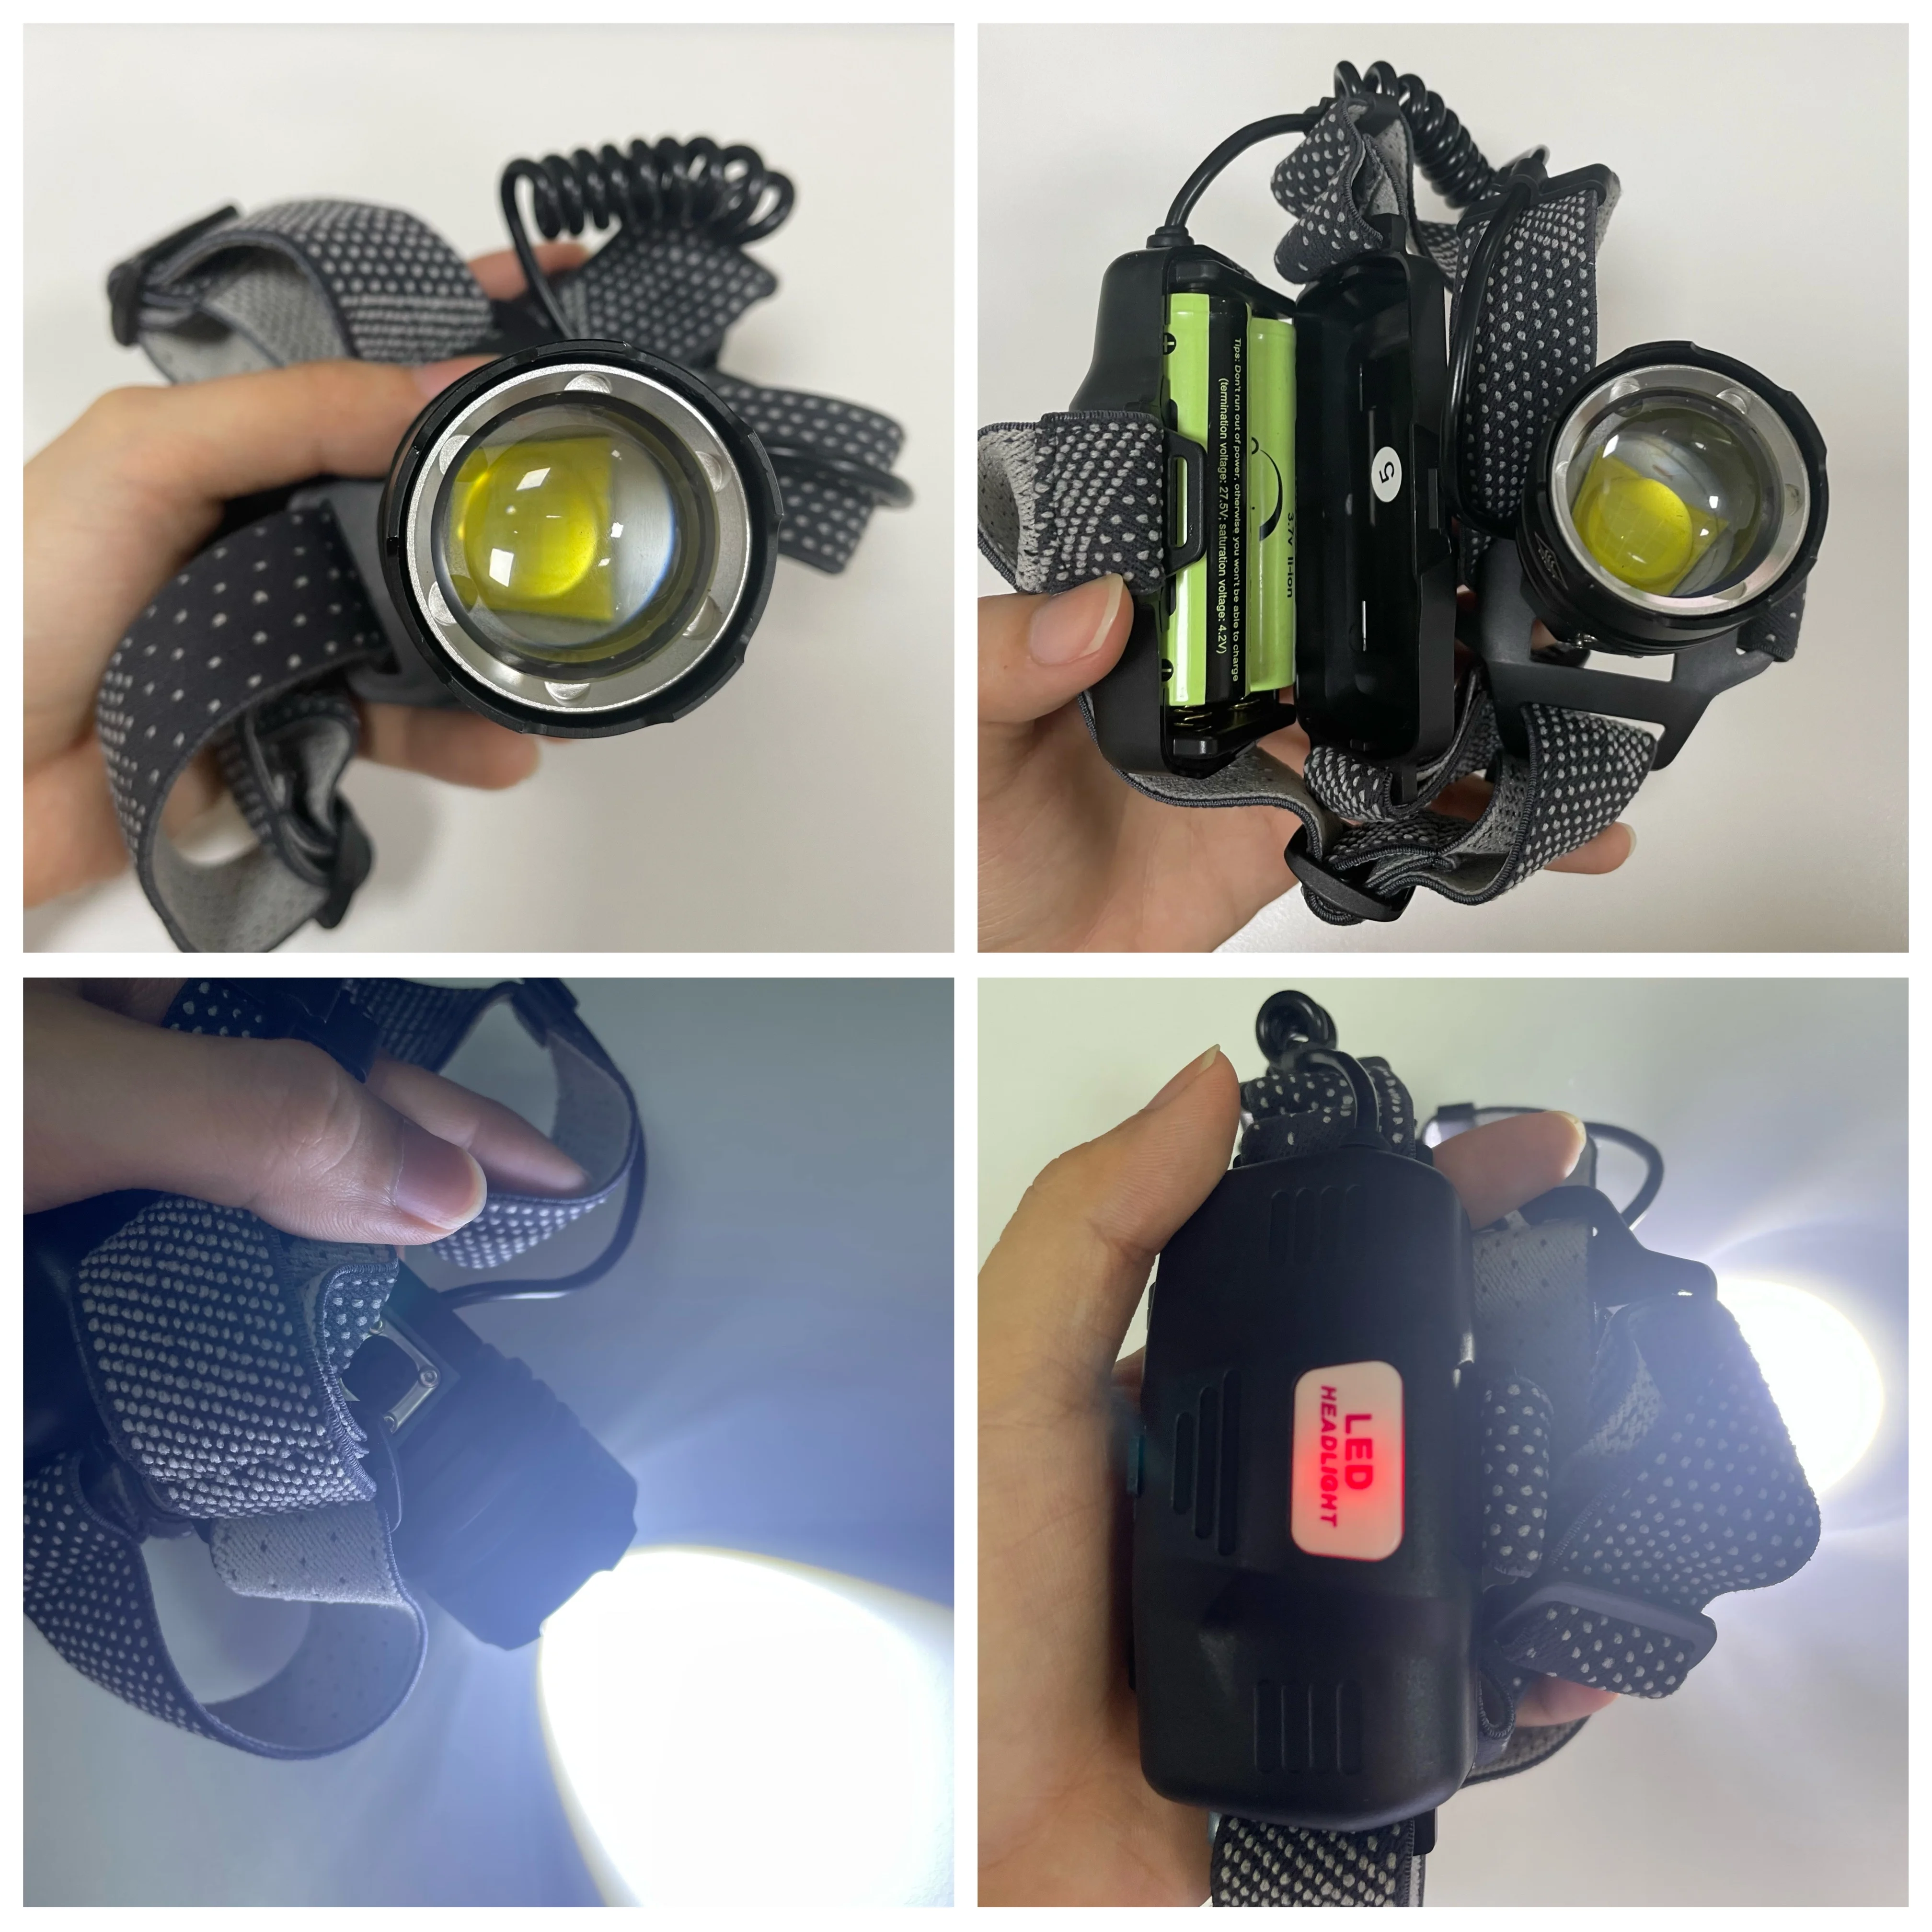 XHP220 Powerful Headlamp 18650 High Power XHP90 LED Headlight Head Flashlight Rechargeable Head lamp Lantern For Camping Fishing images - 4